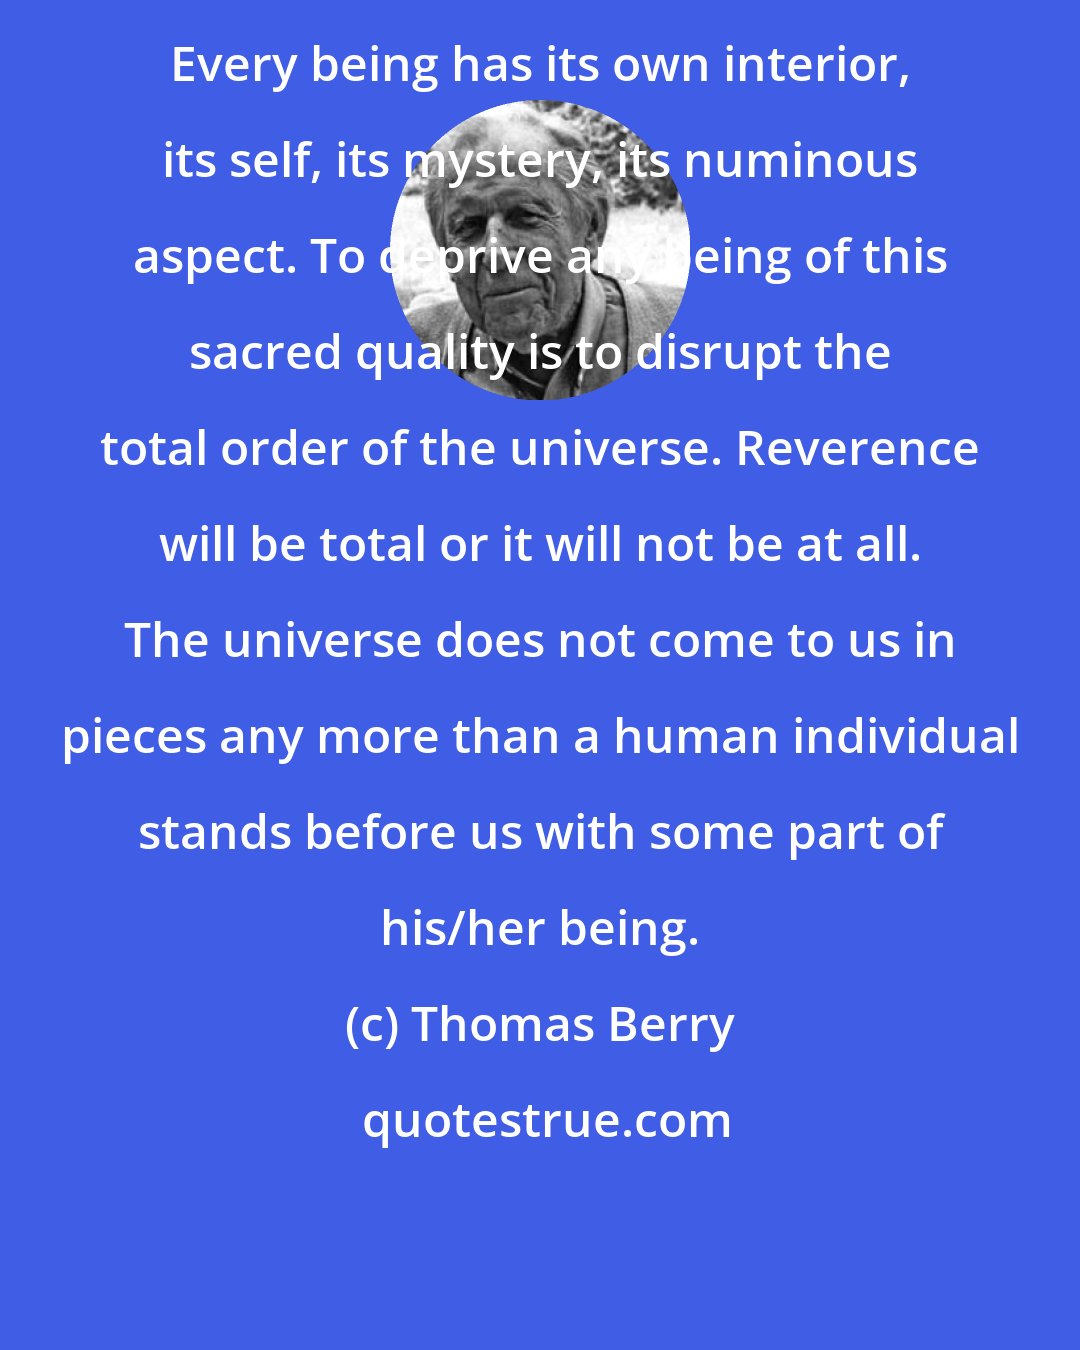 Thomas Berry: Every being has its own interior, its self, its mystery, its numinous aspect. To deprive any being of this sacred quality is to disrupt the total order of the universe. Reverence will be total or it will not be at all. The universe does not come to us in pieces any more than a human individual stands before us with some part of his/her being.